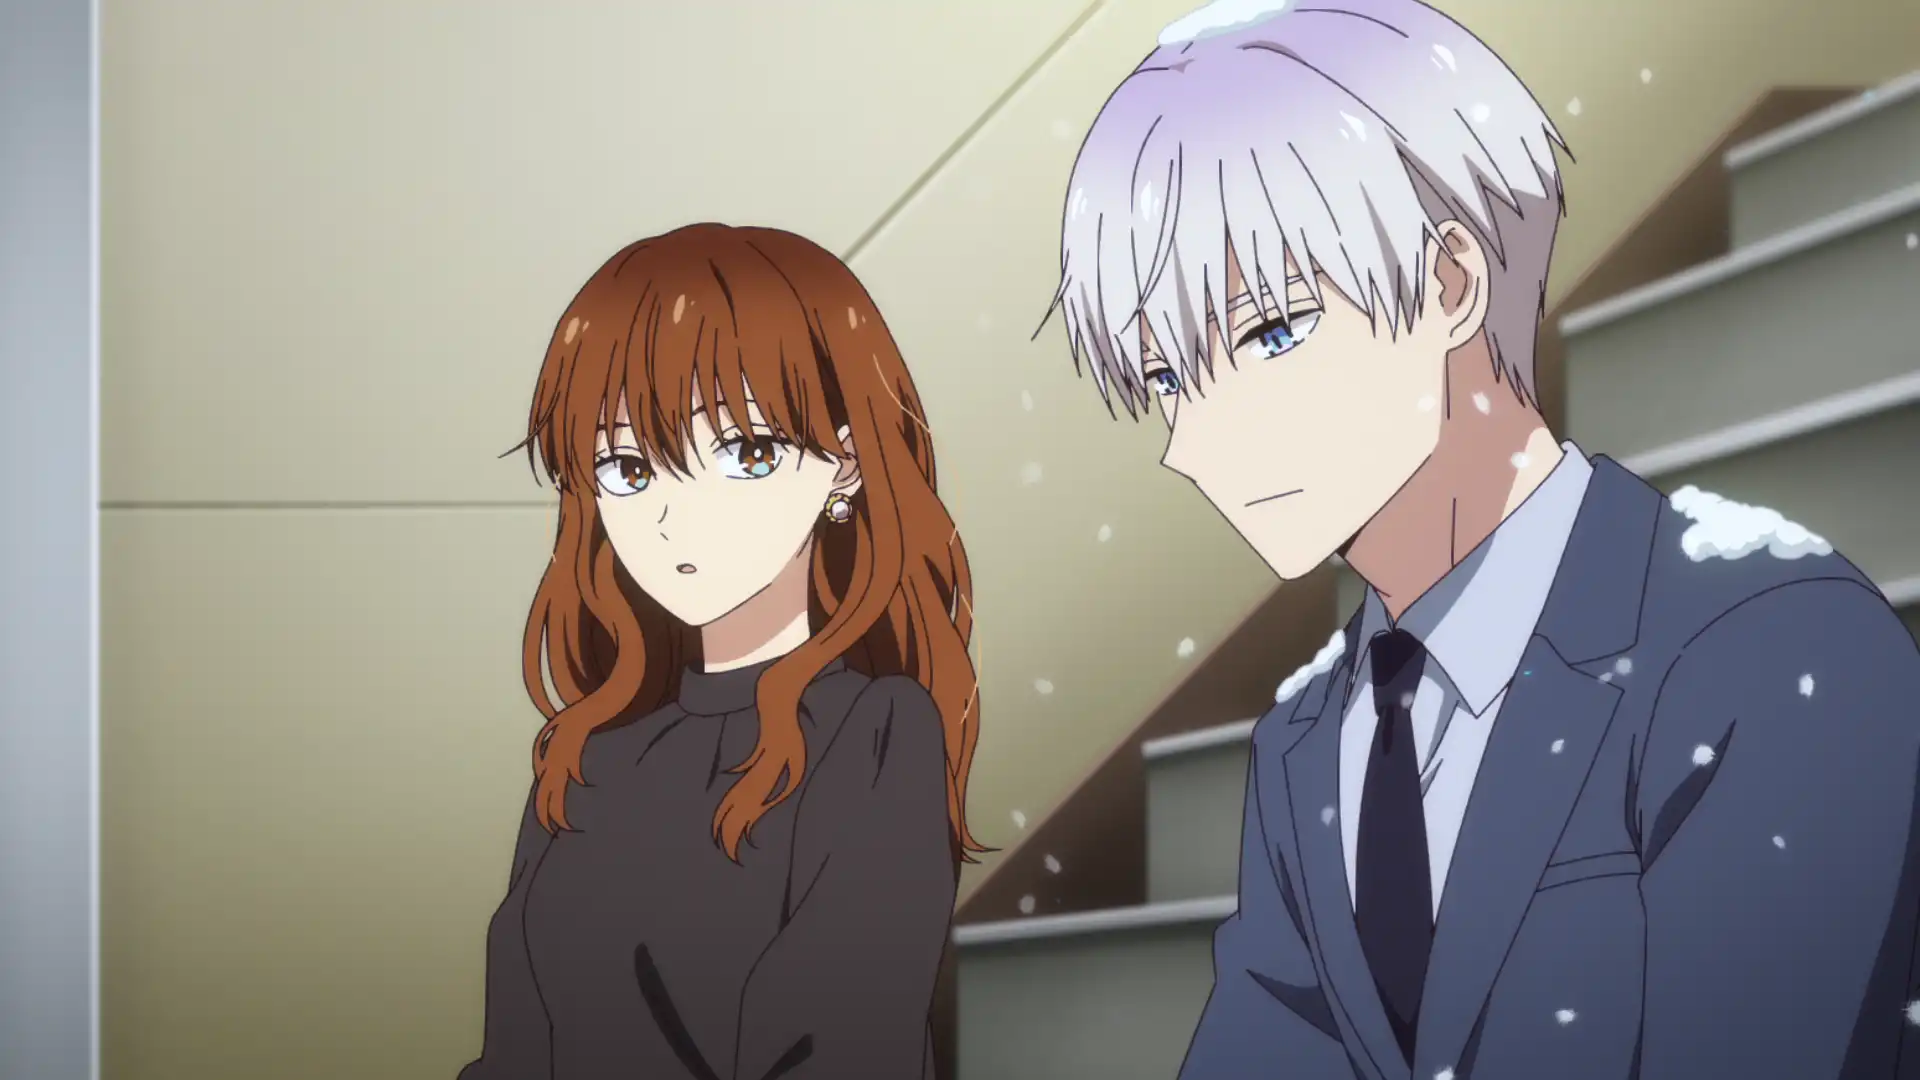 The Ice Guy And His Cool Female Colleague Episode 5 Release Date Confirmed: